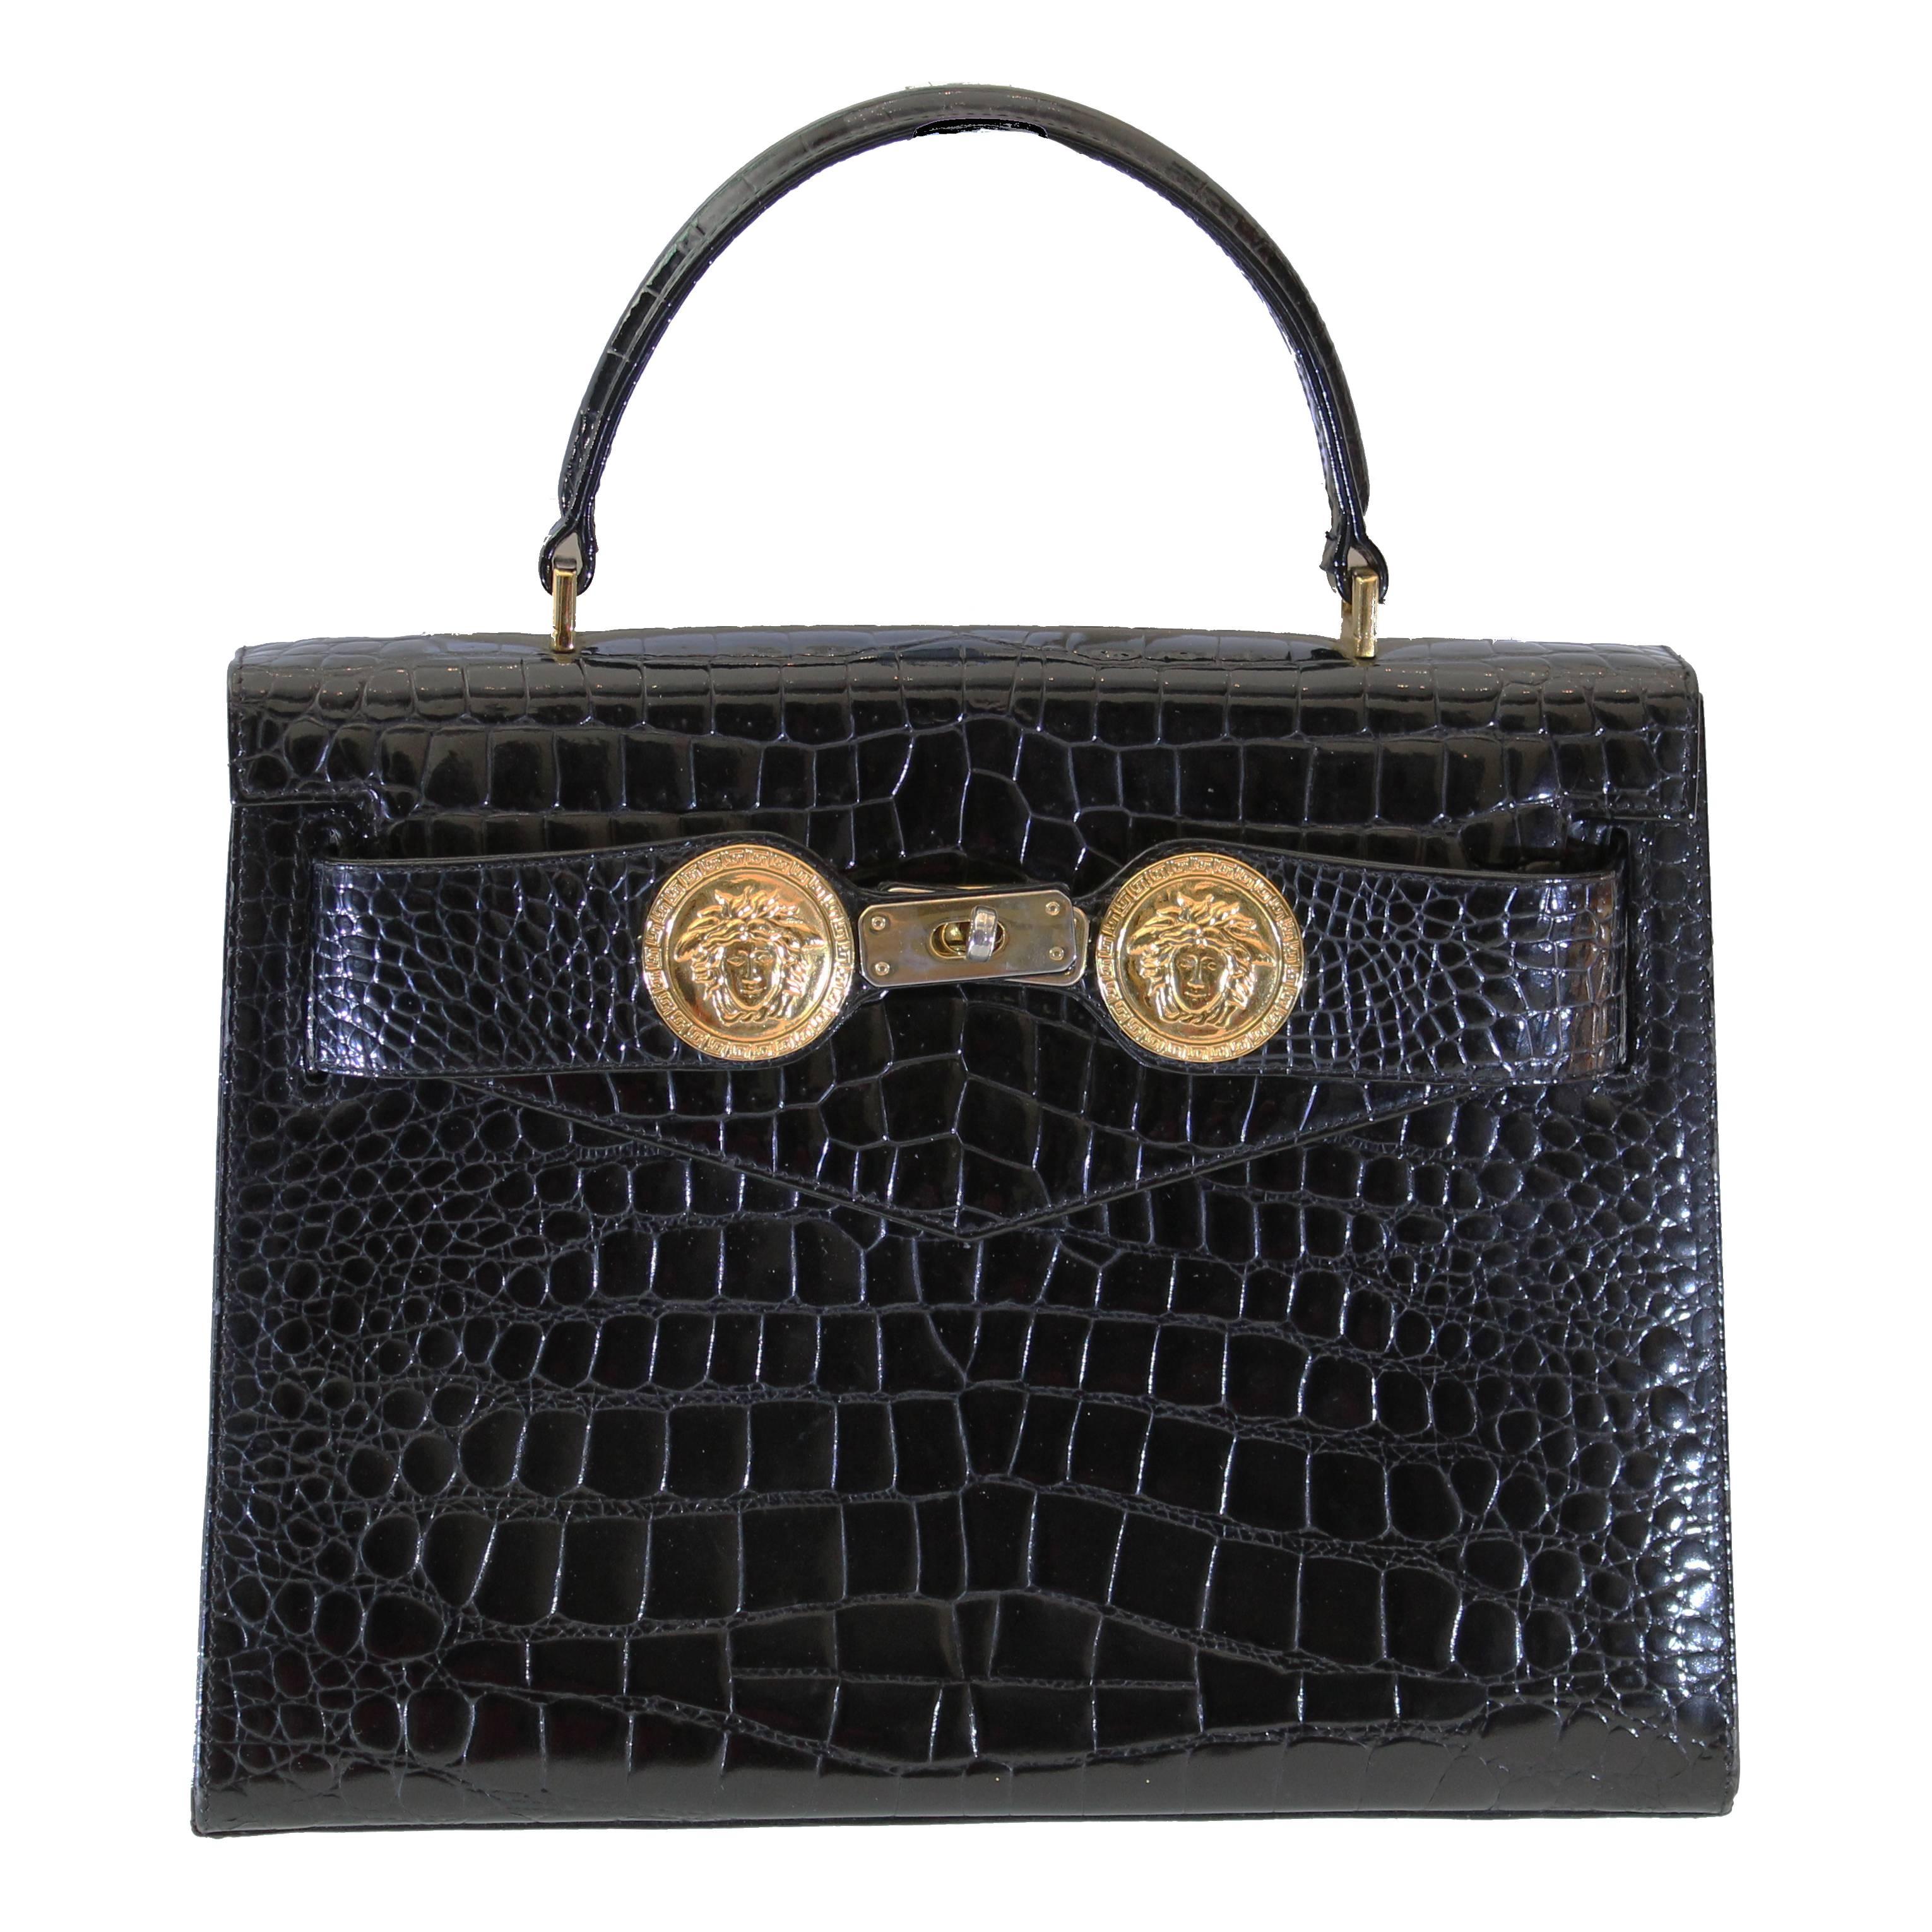 RARE AND COLLECTIBLE GIANNI VERSACE COUTURE BAG Princess Diana owned the same! 